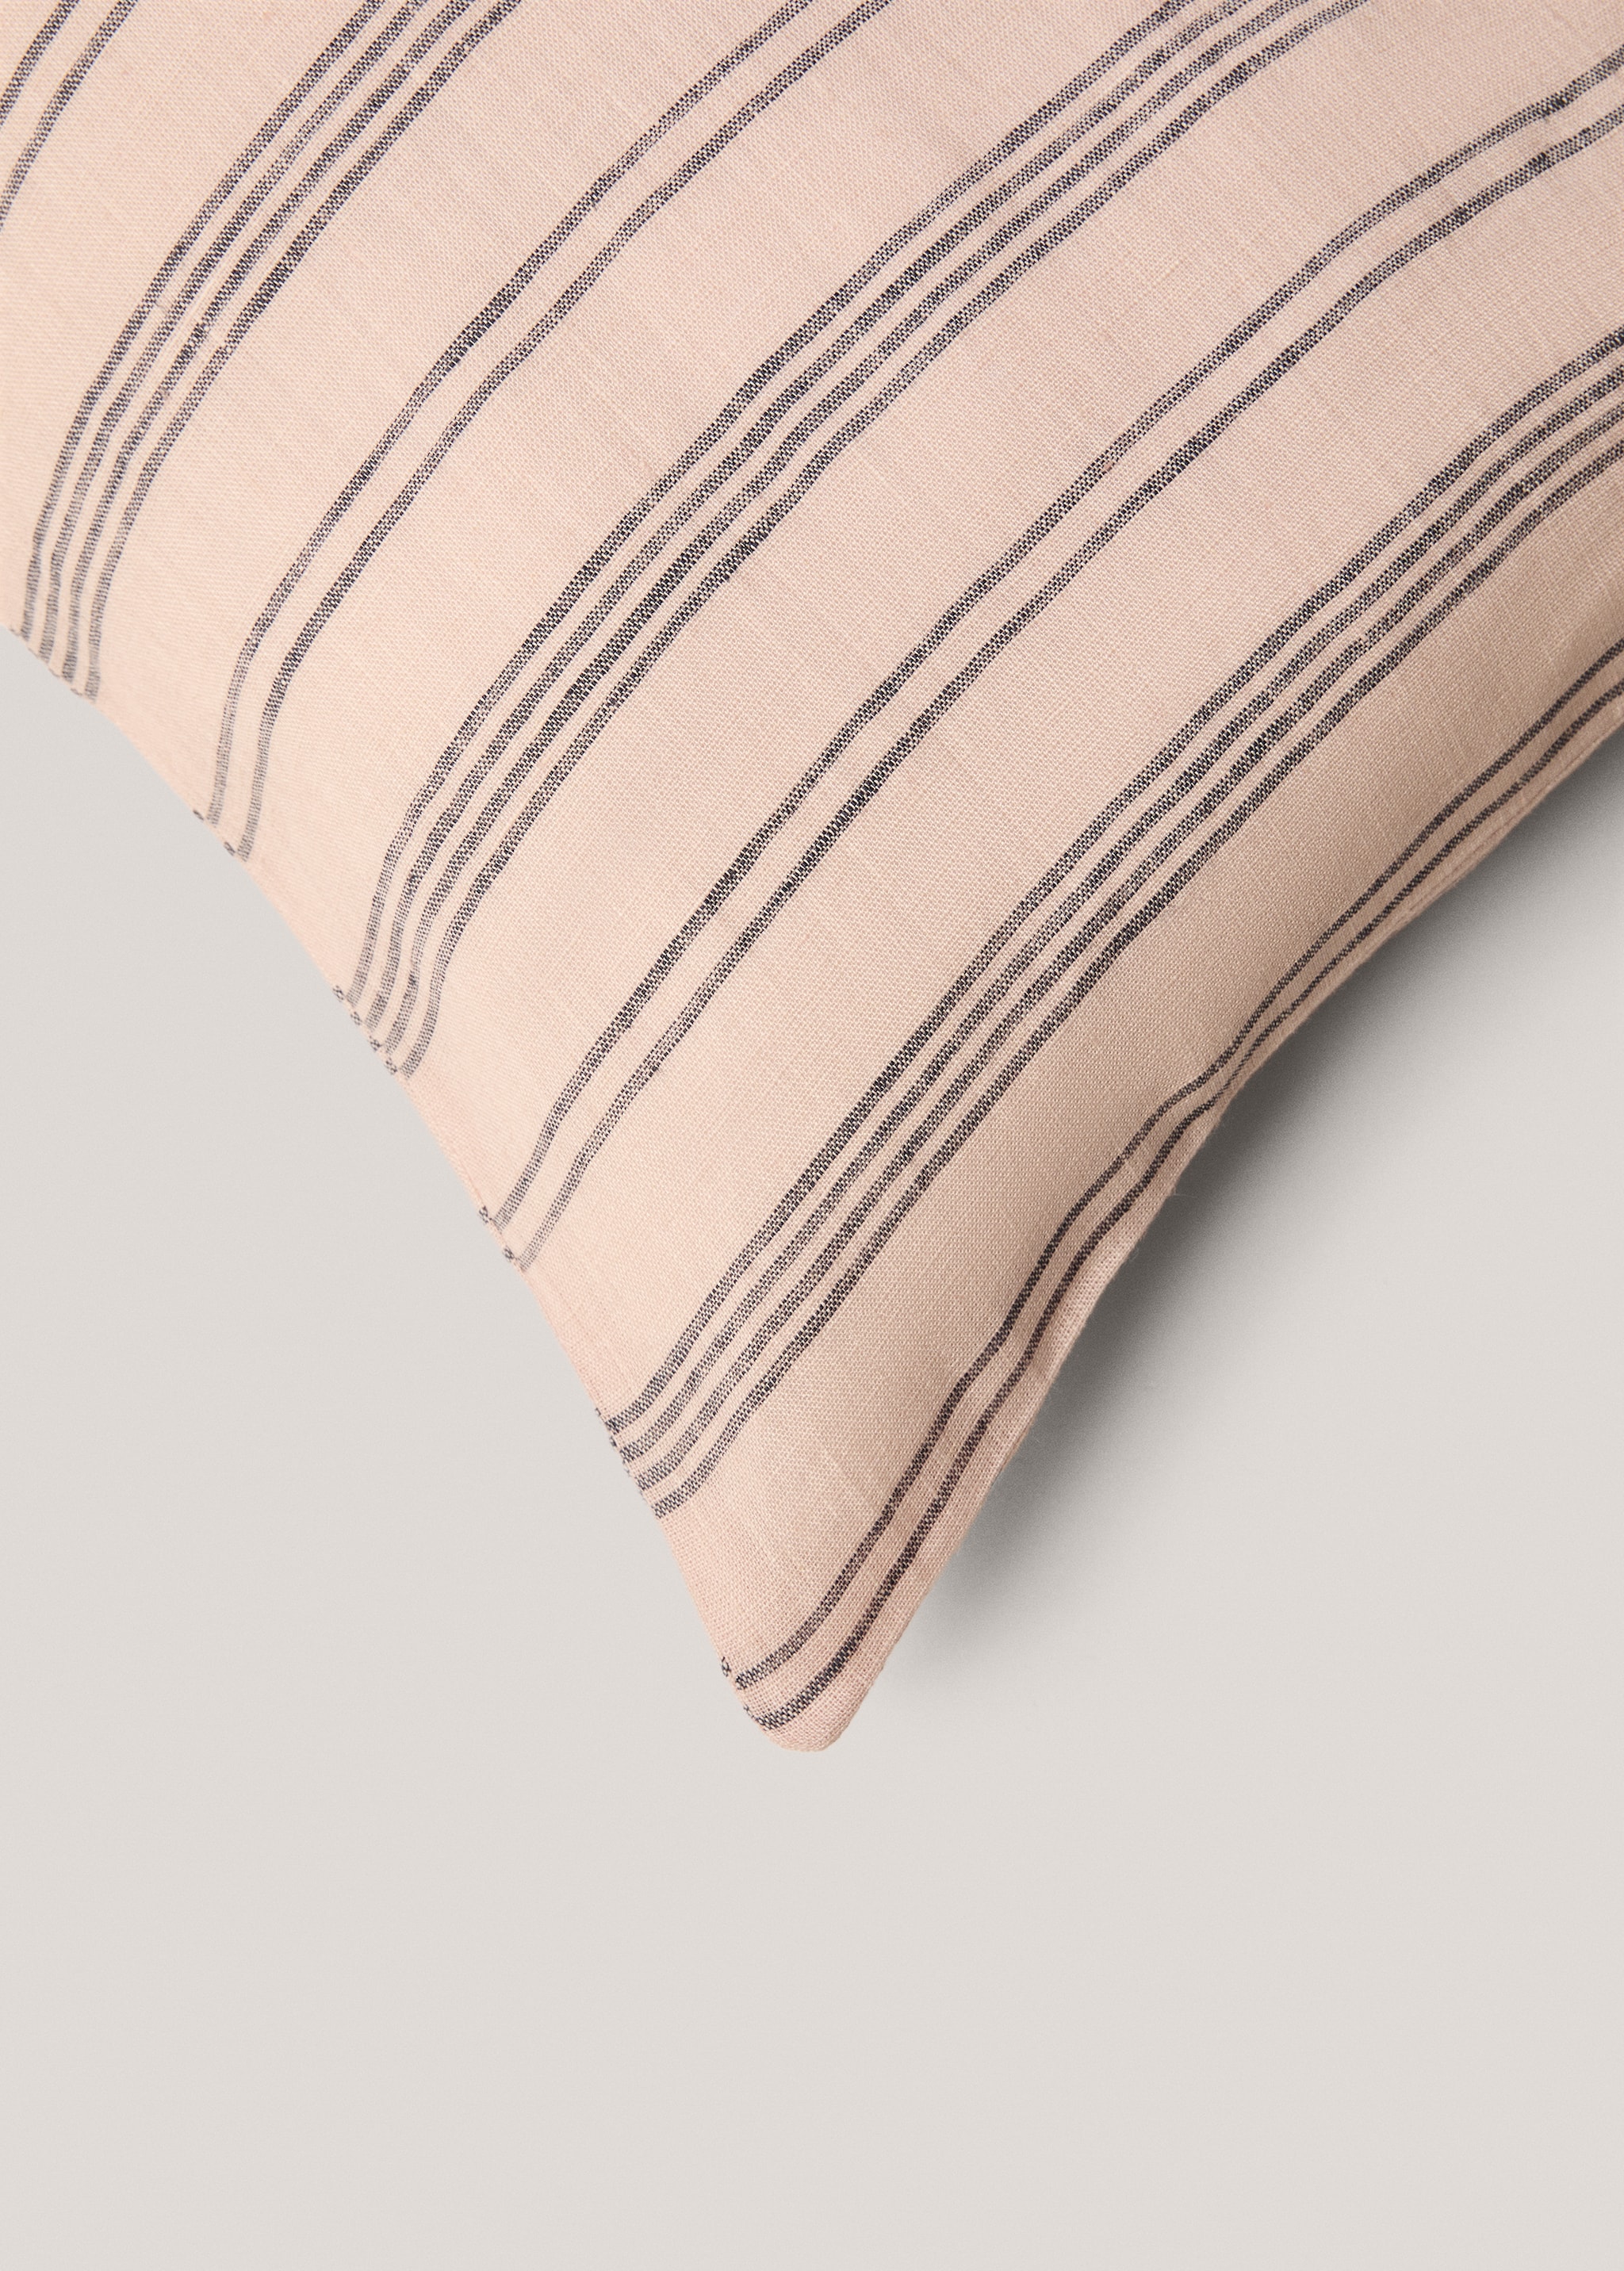 100% linen striped cushion cover 40x60cm - Details of the article 2